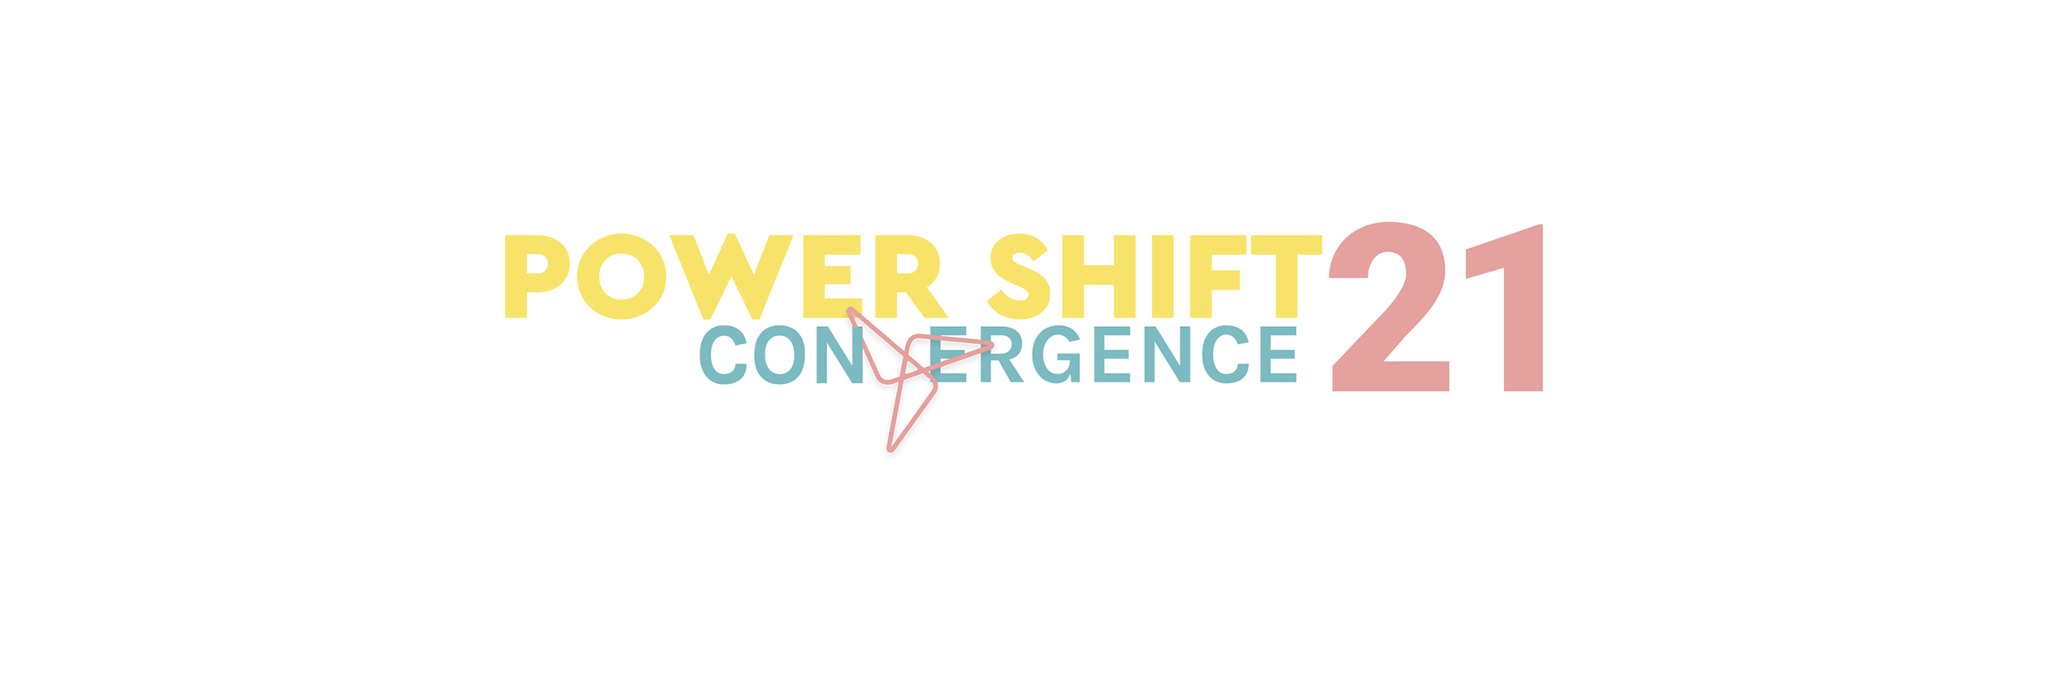 Register for the Power Shift Network Convergence